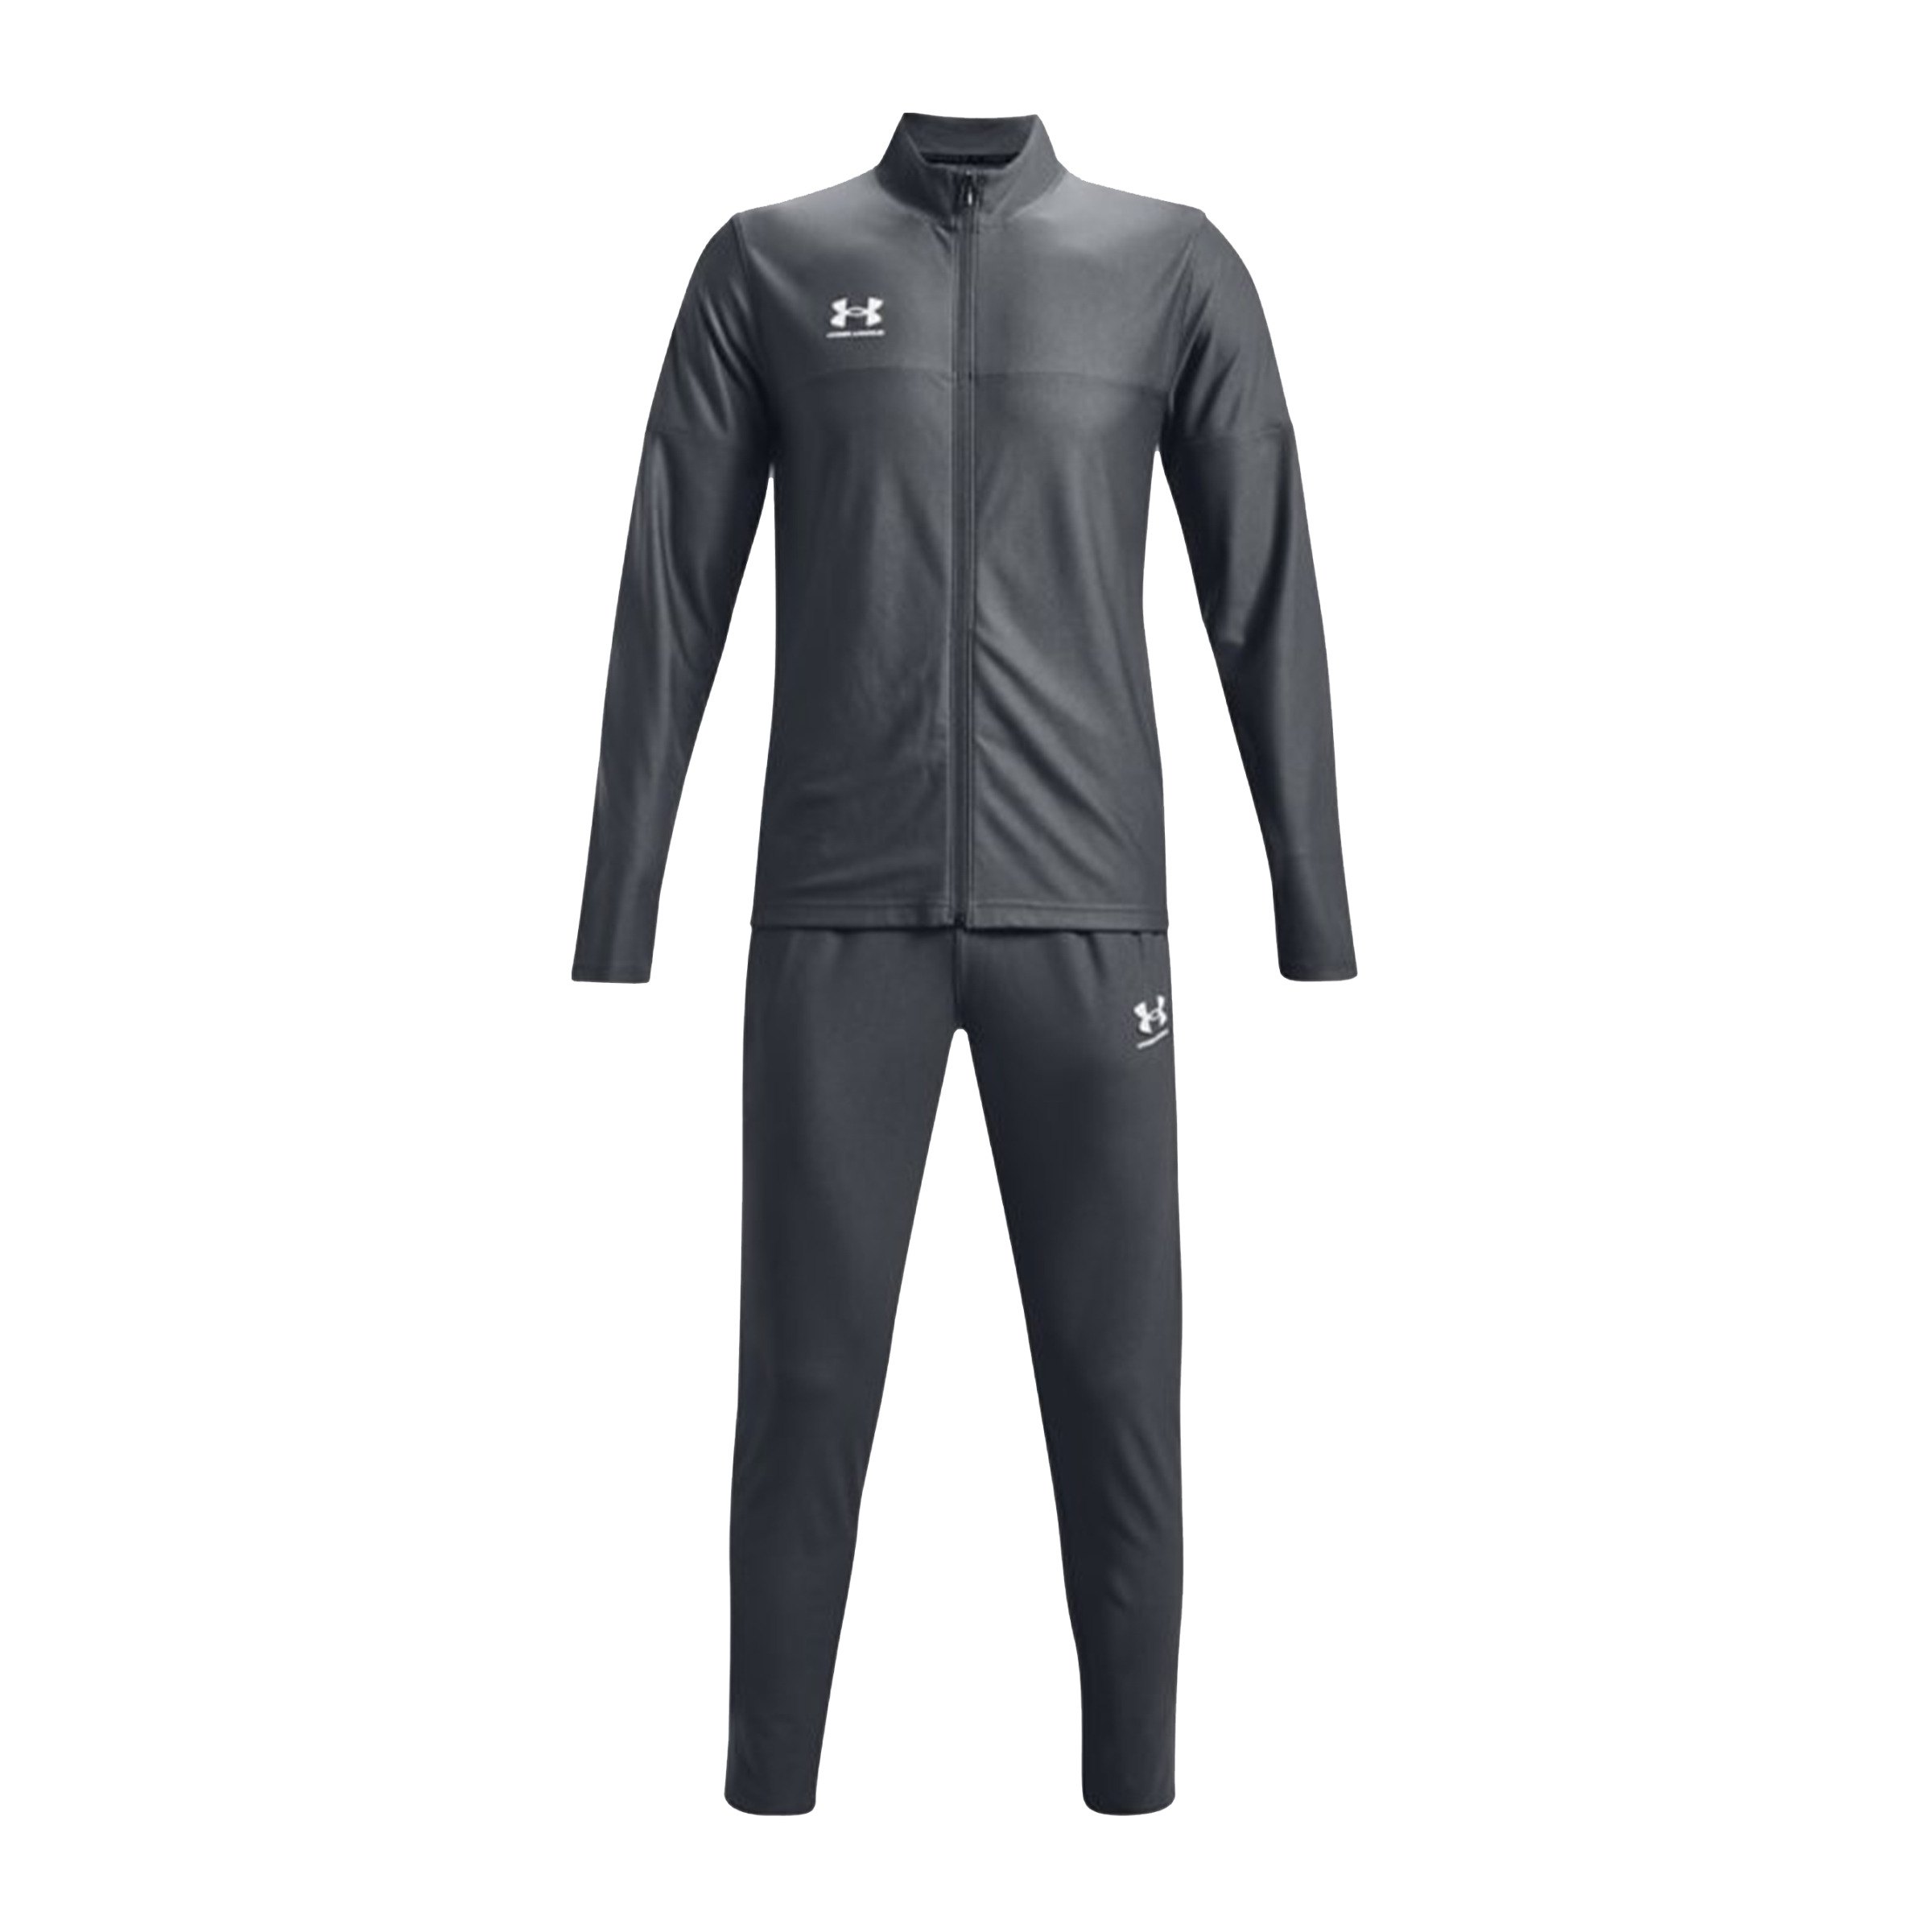 Under Armour Challenger II Training Pant Anthracite Grey